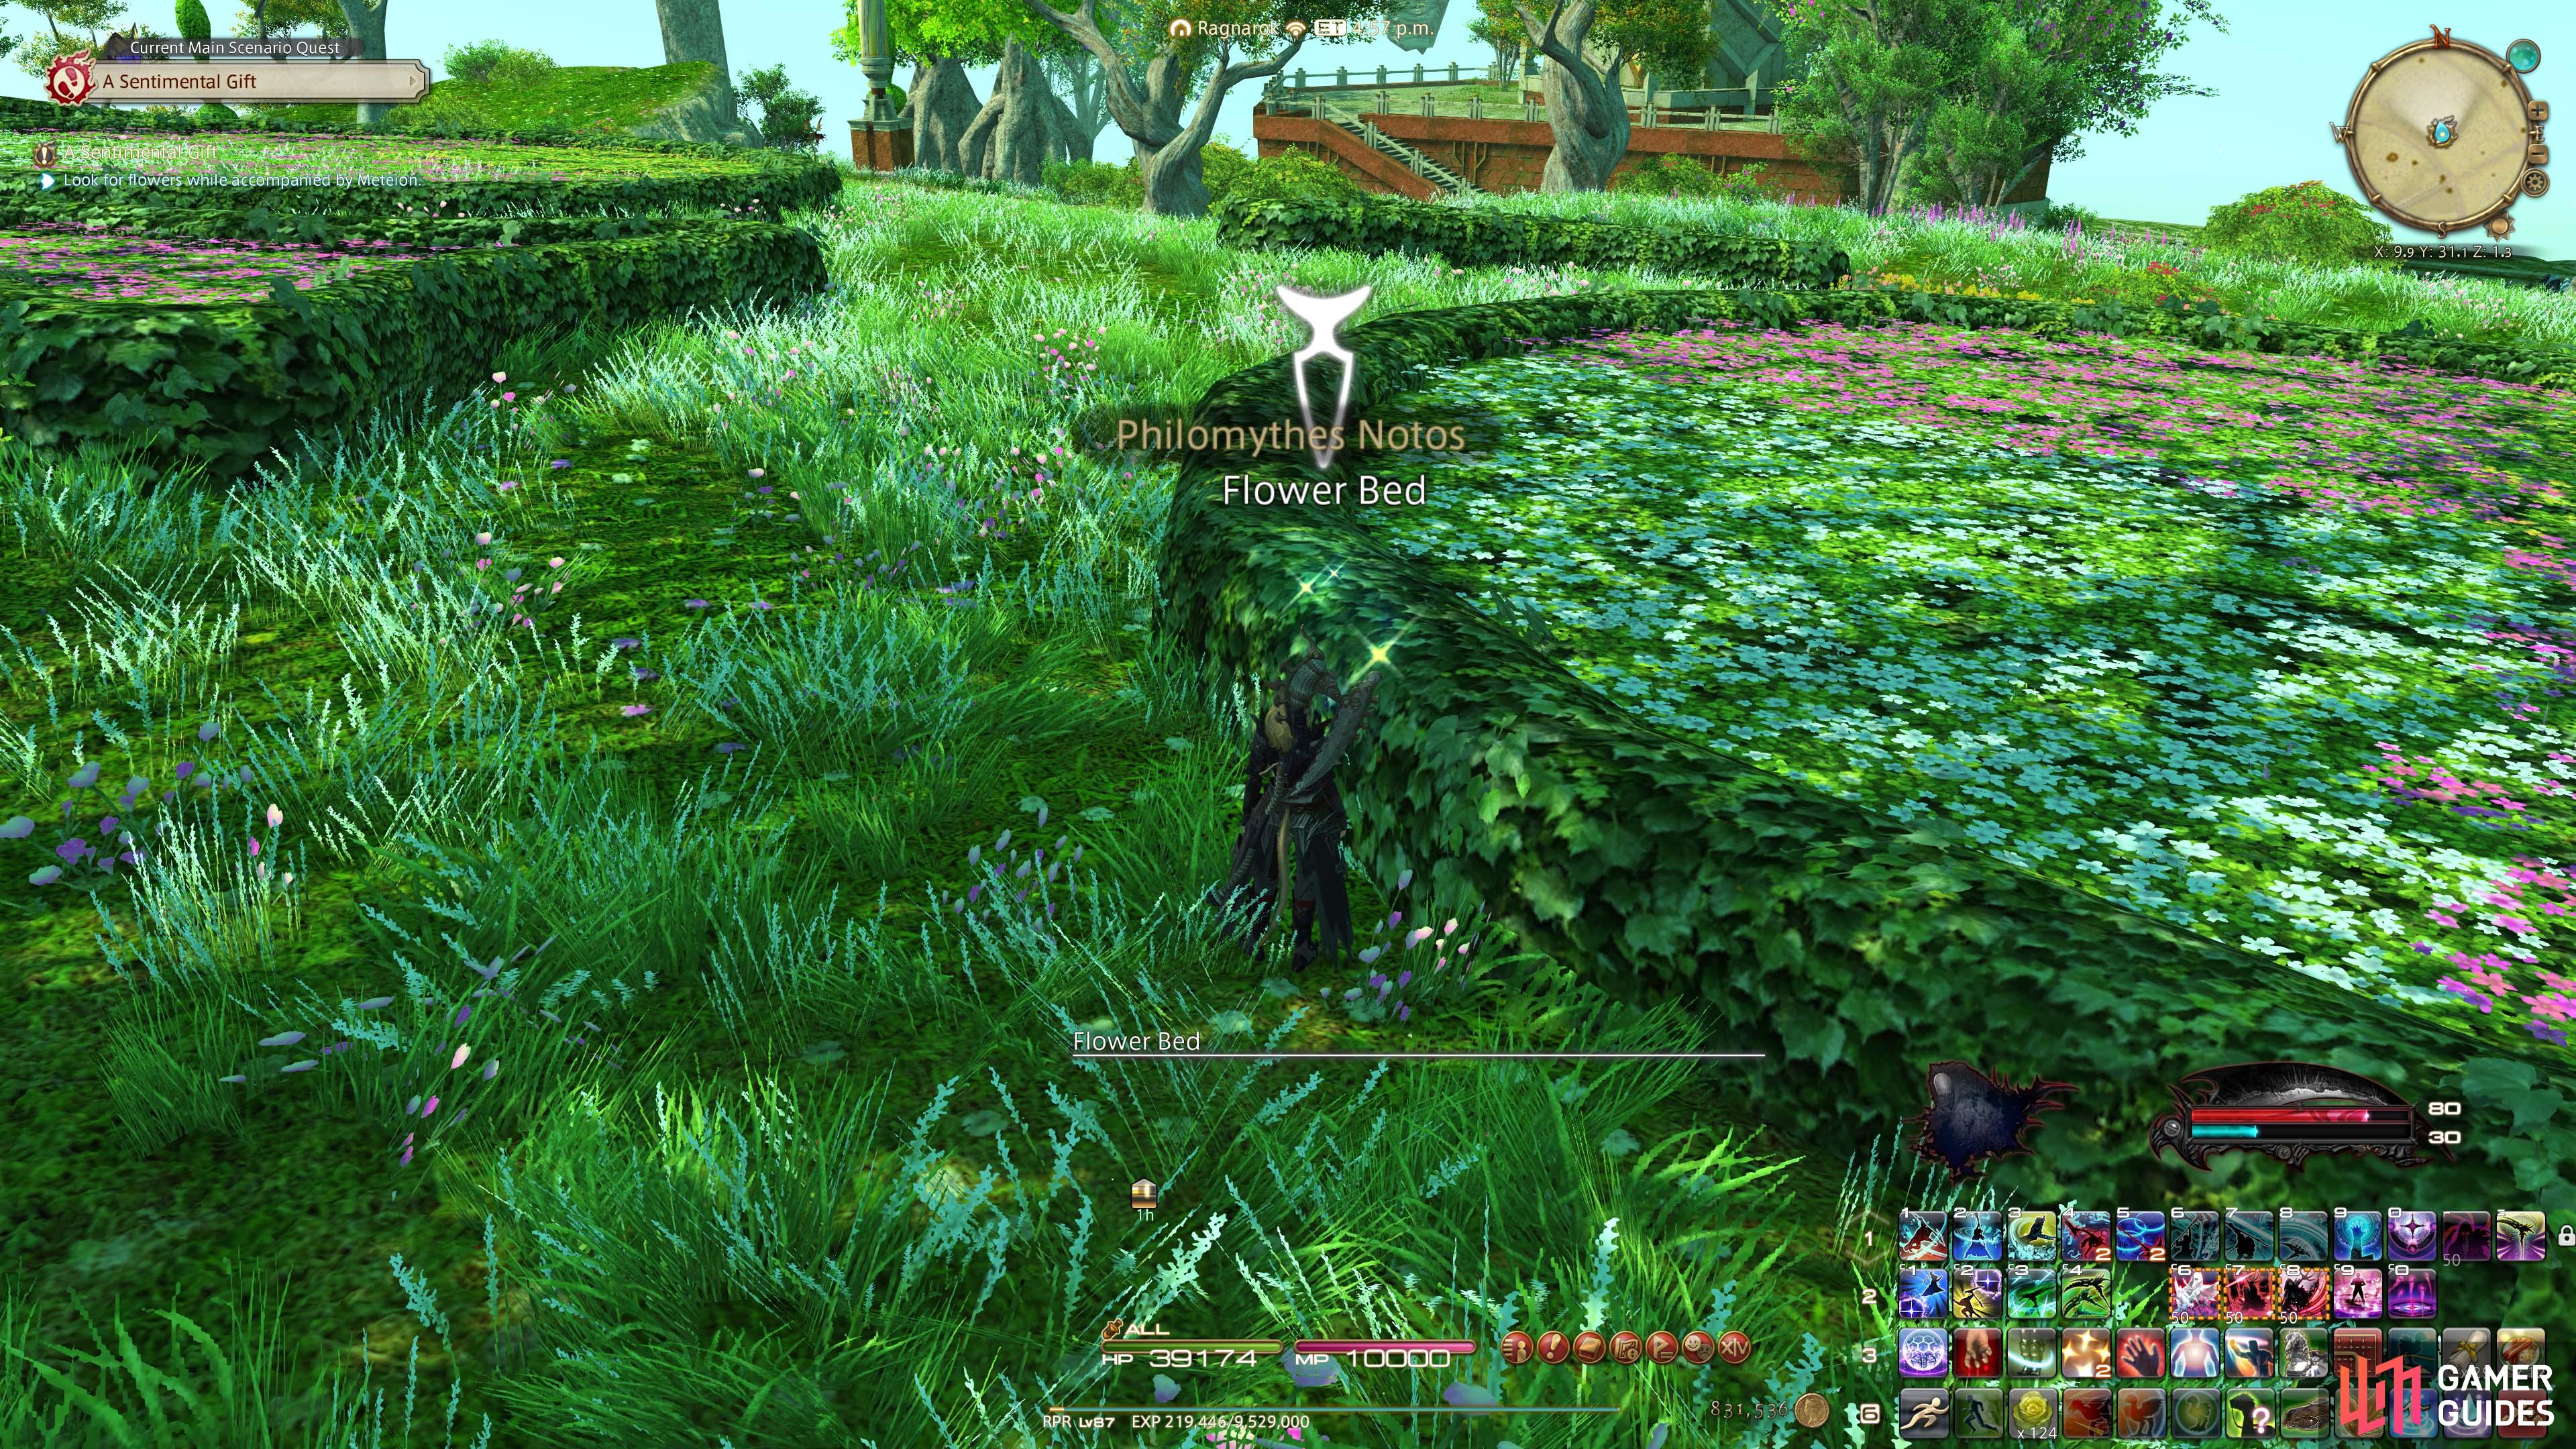 Examine the flower bed with Meteion.